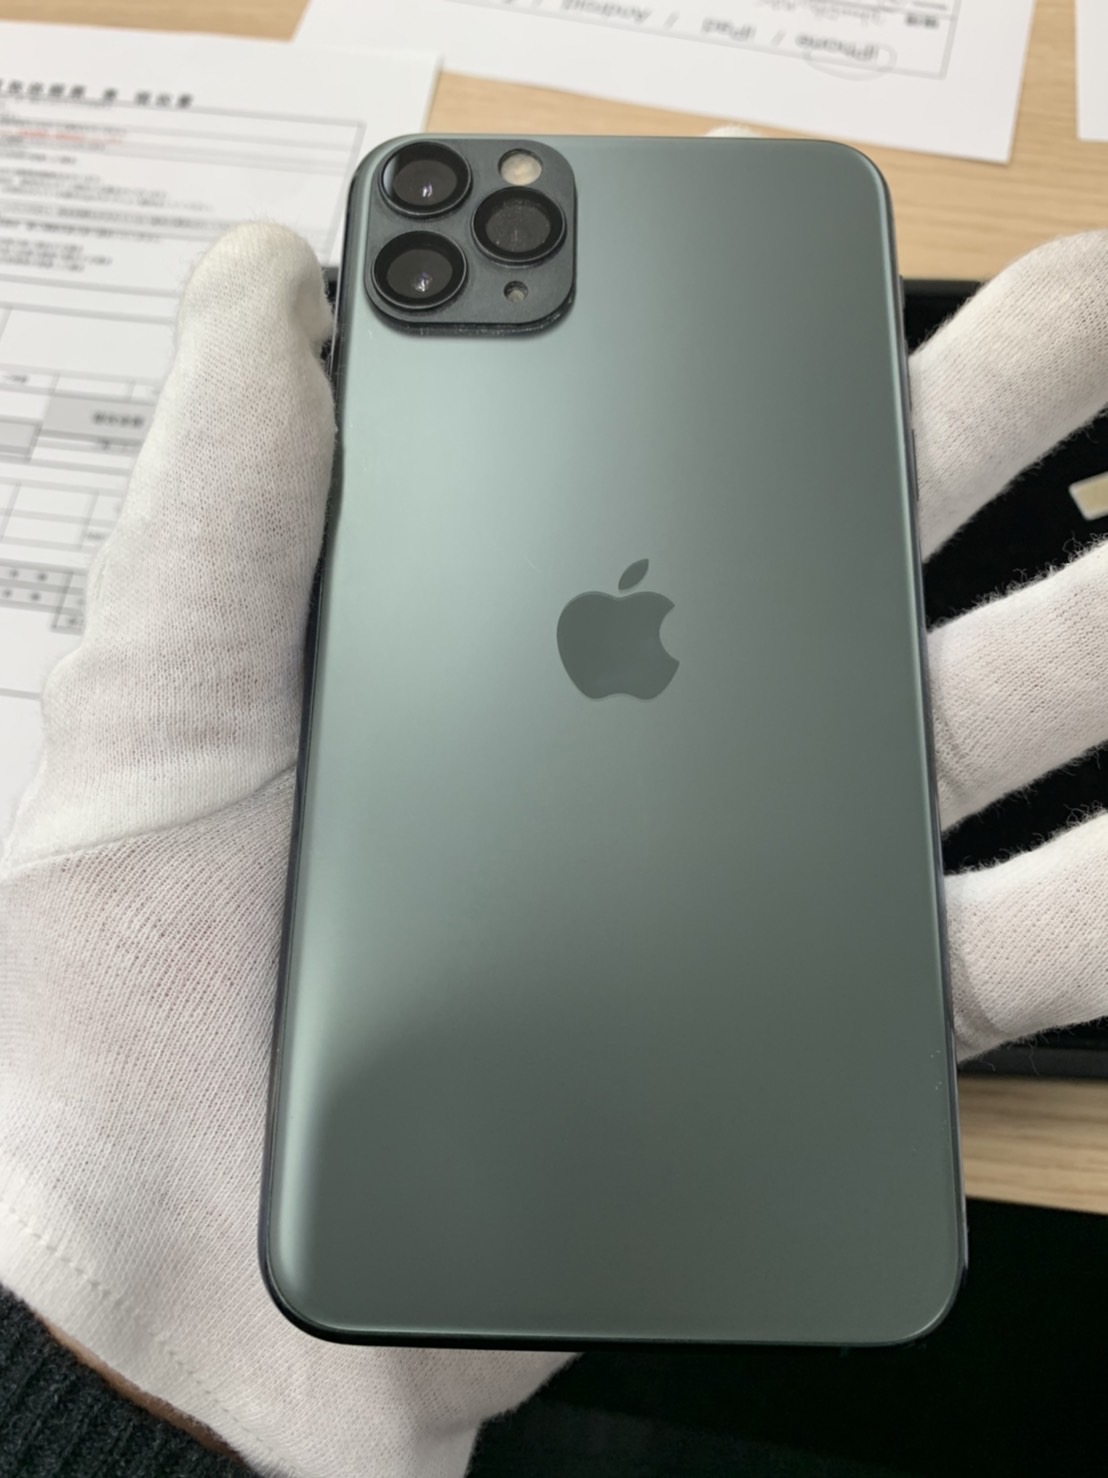 iPhone11ProMAX 256GB ソフトバンク 中古美品